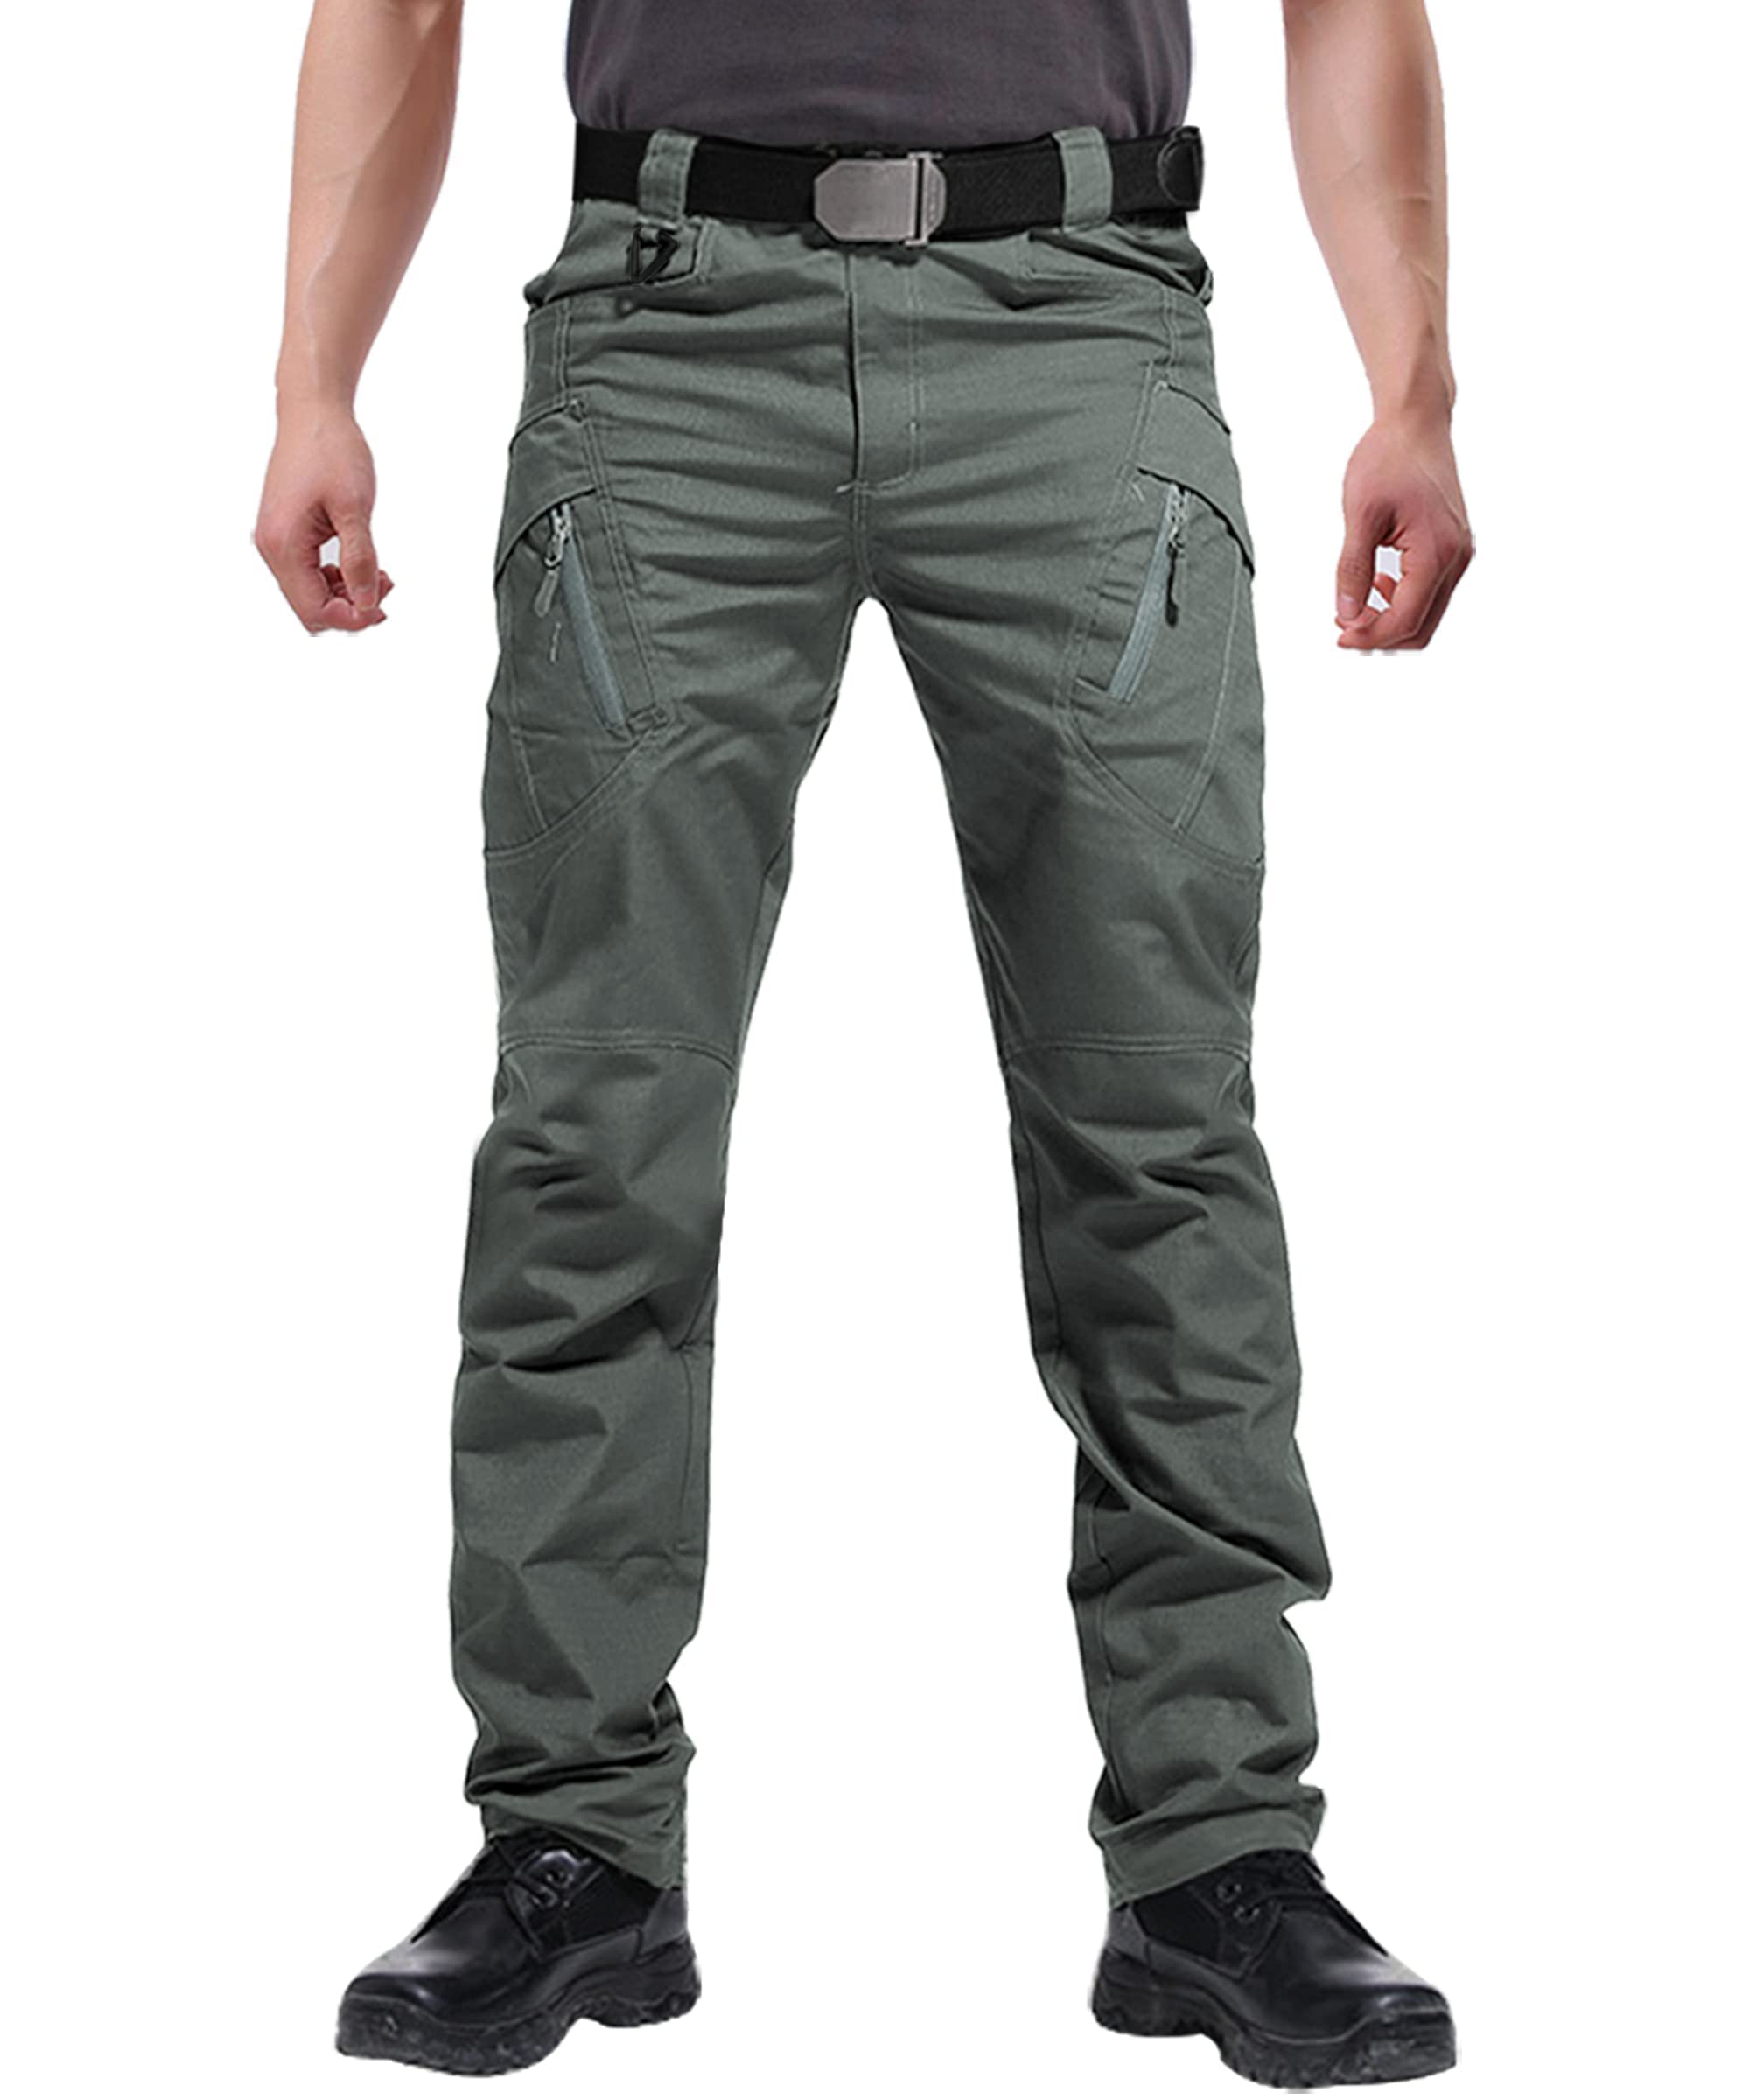 Susclude Men's Outdoor Cargo Work Trousers Military Tactical Pants Ripstop  Assault Combat Trousers Hiking Pants Men Green 34W x 32L